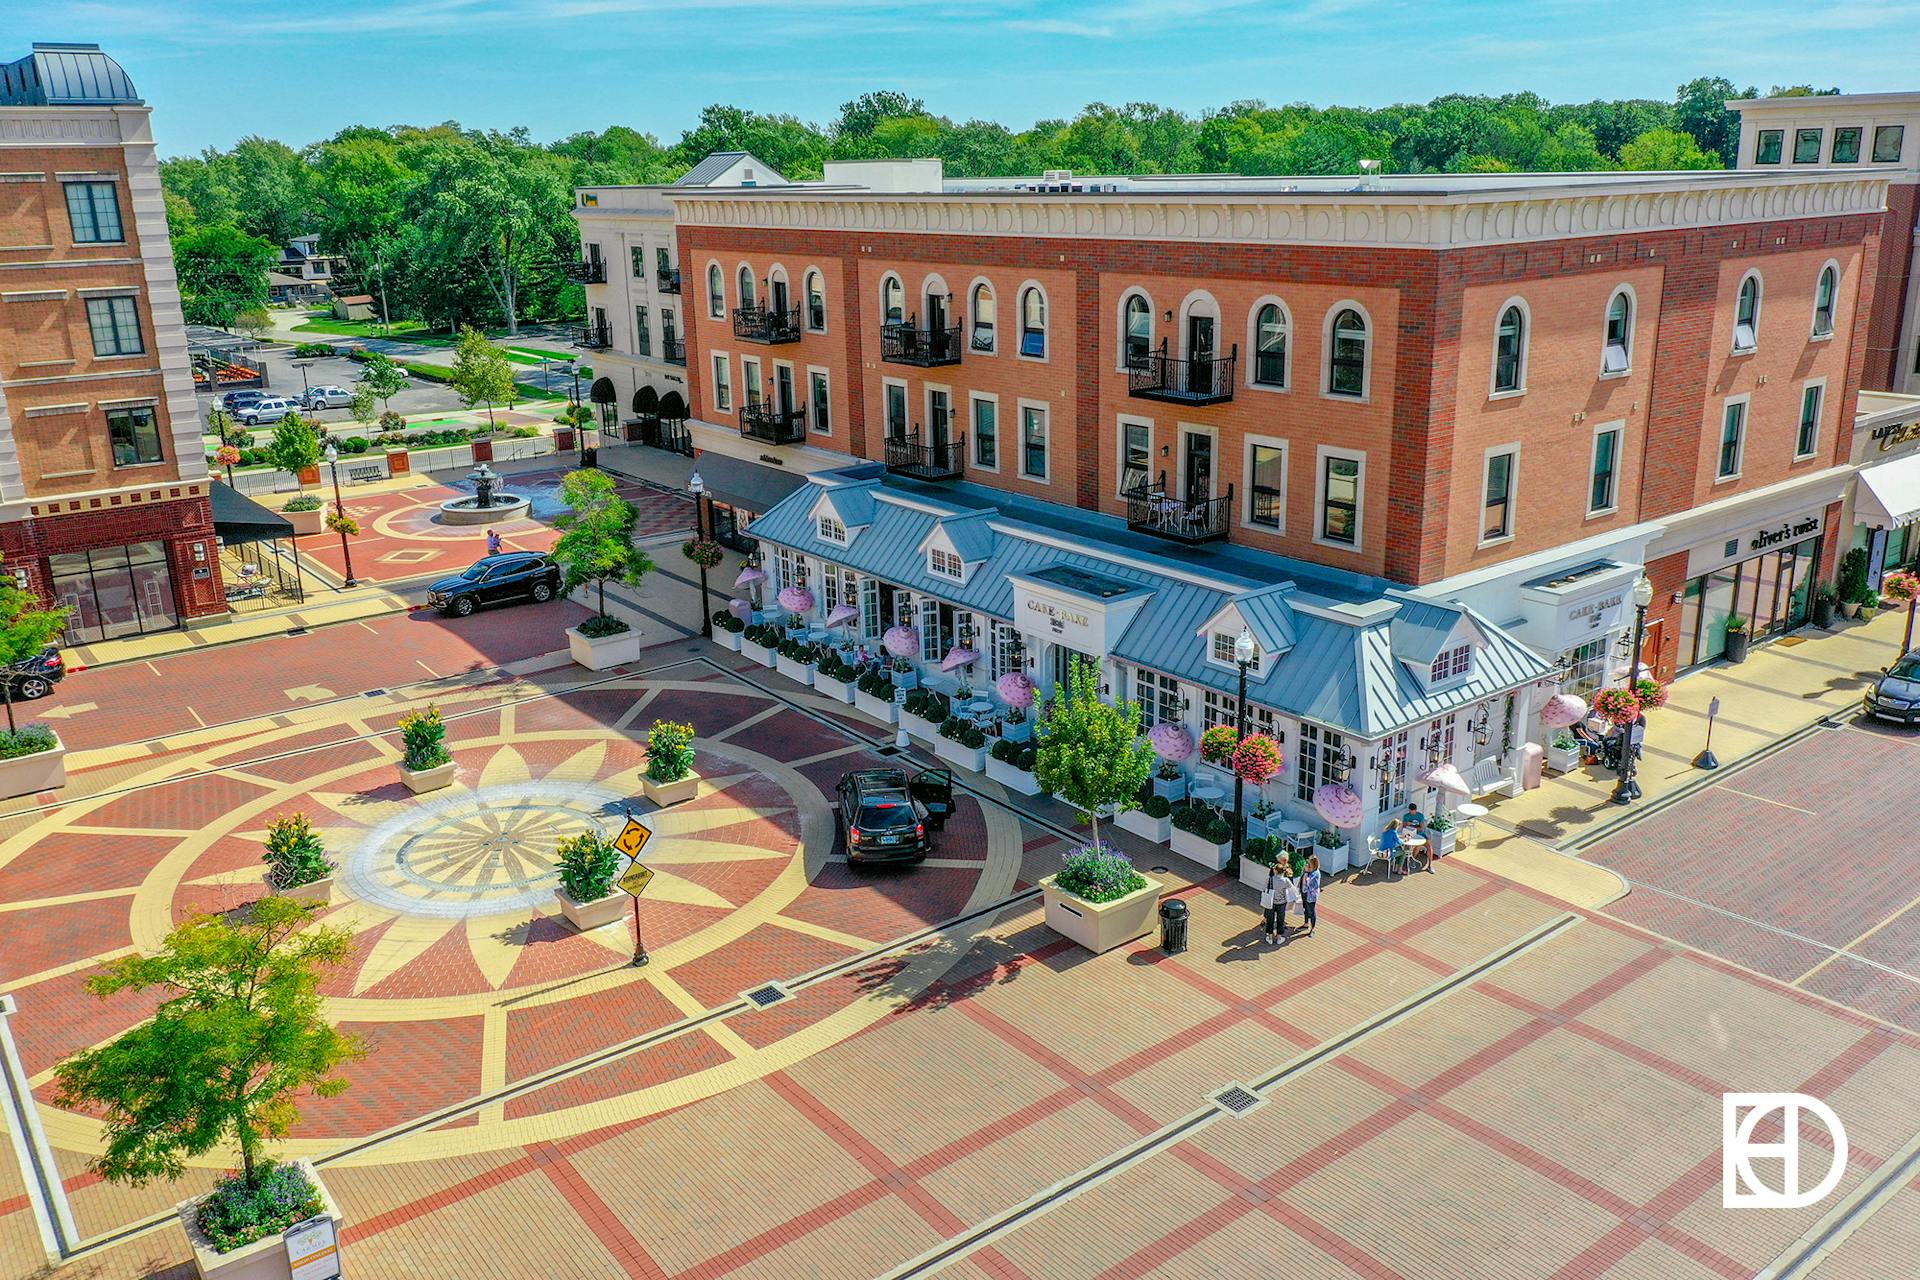 Aerial view of The Cake Bake Shop and the plaza at City Center